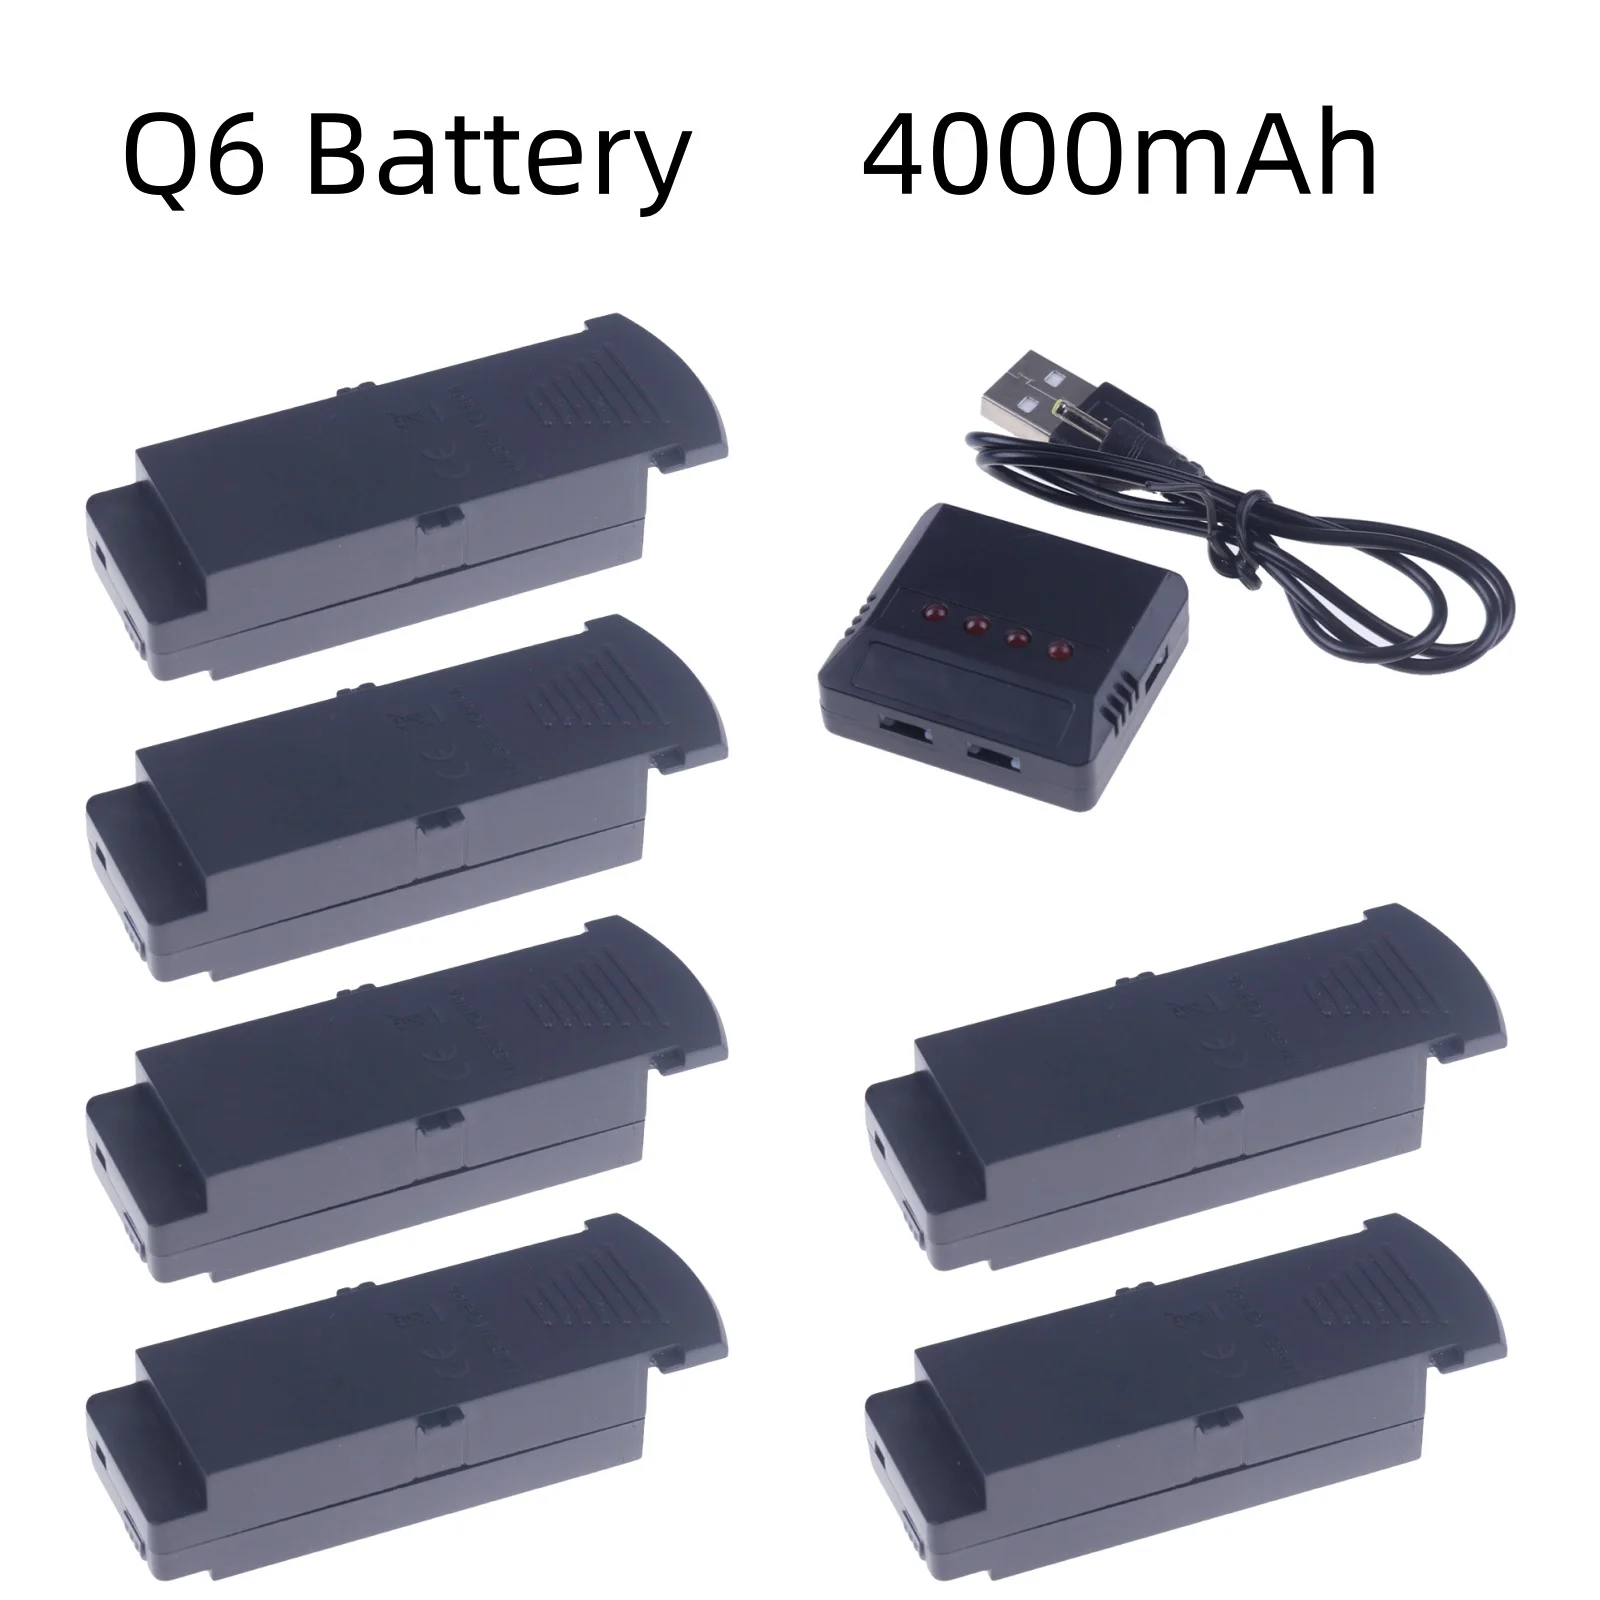 

Q6 S6 G6 T6 K5 Drones Battery 3.7V 4000mAh for G6 S6 8K RC Quadcopter Spare Parts For G6 Pro Rechargeable Lipo Battery